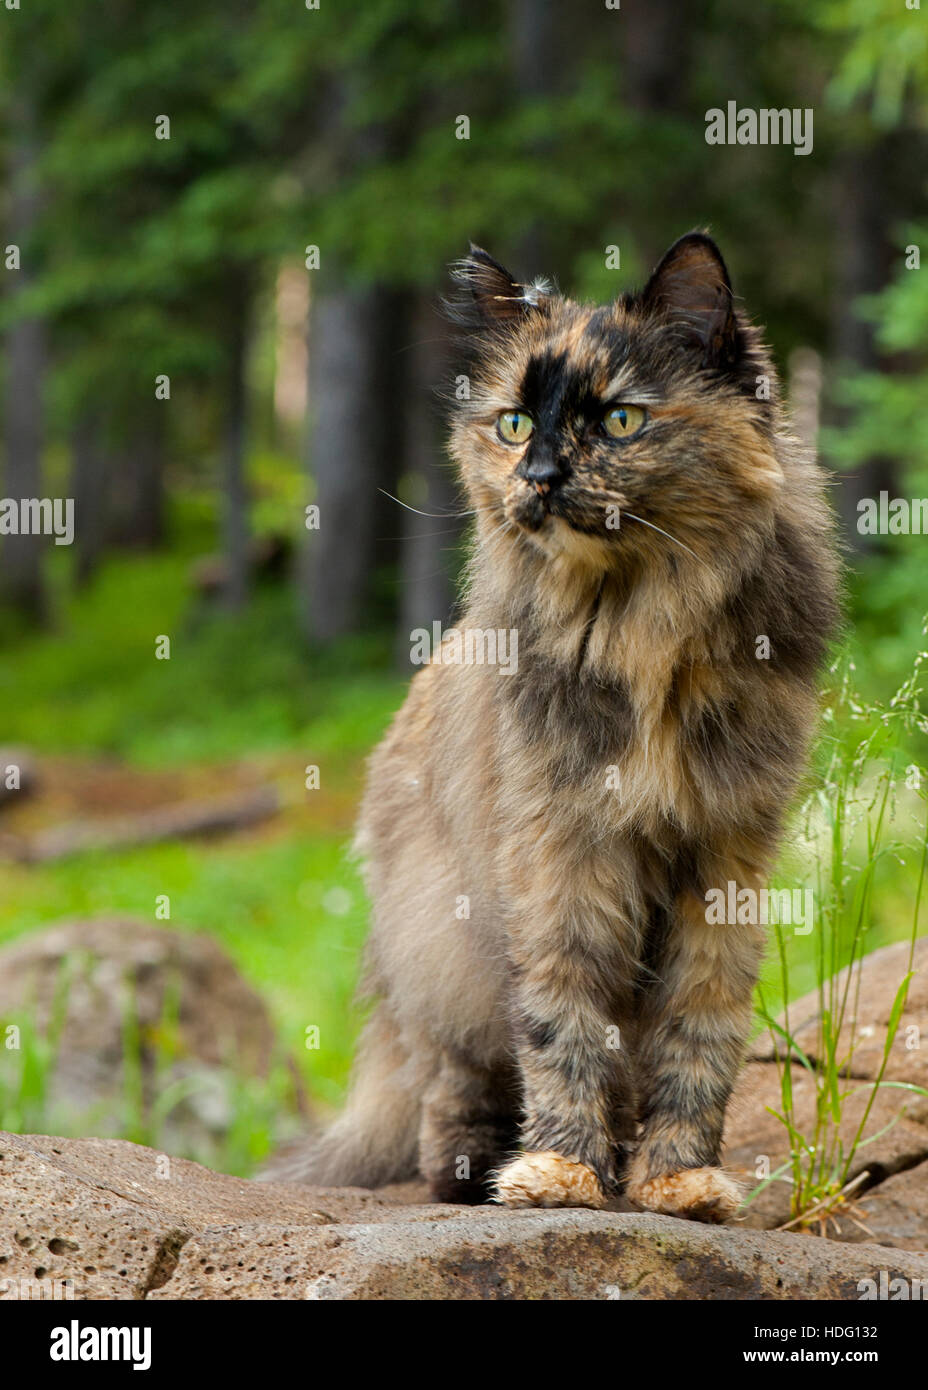 A tortoiseshell cat in a forest Stock Photo